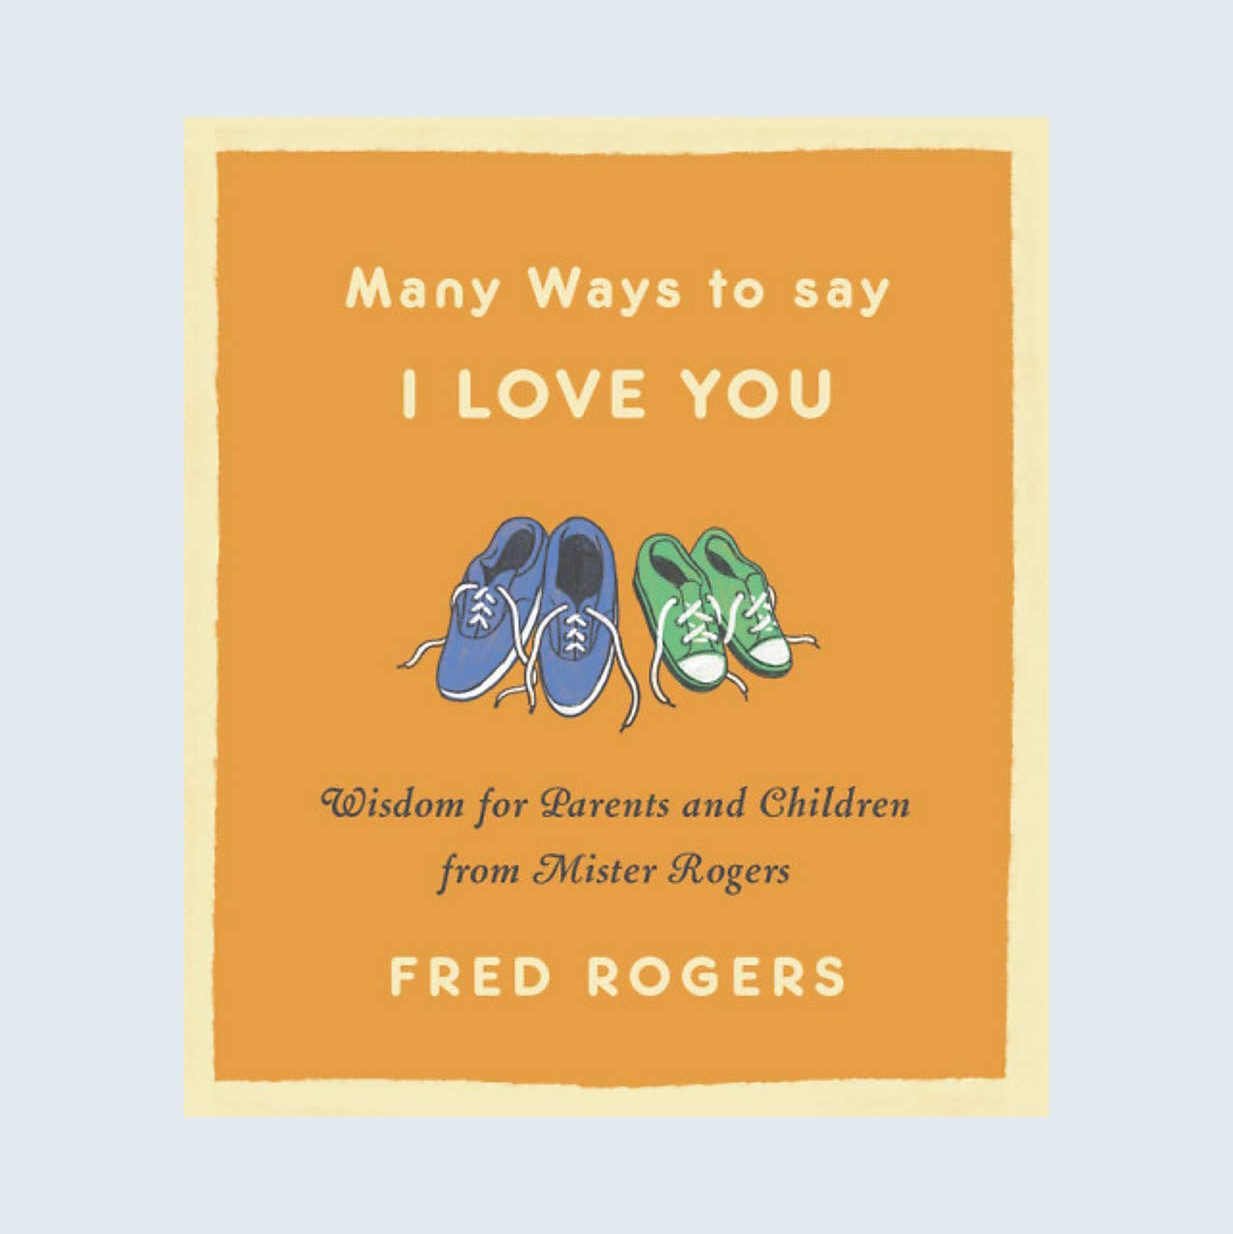 Many Ways to Say I Love You: Wisdom for Parents and Children from Mister Rogers by Fred Rogers